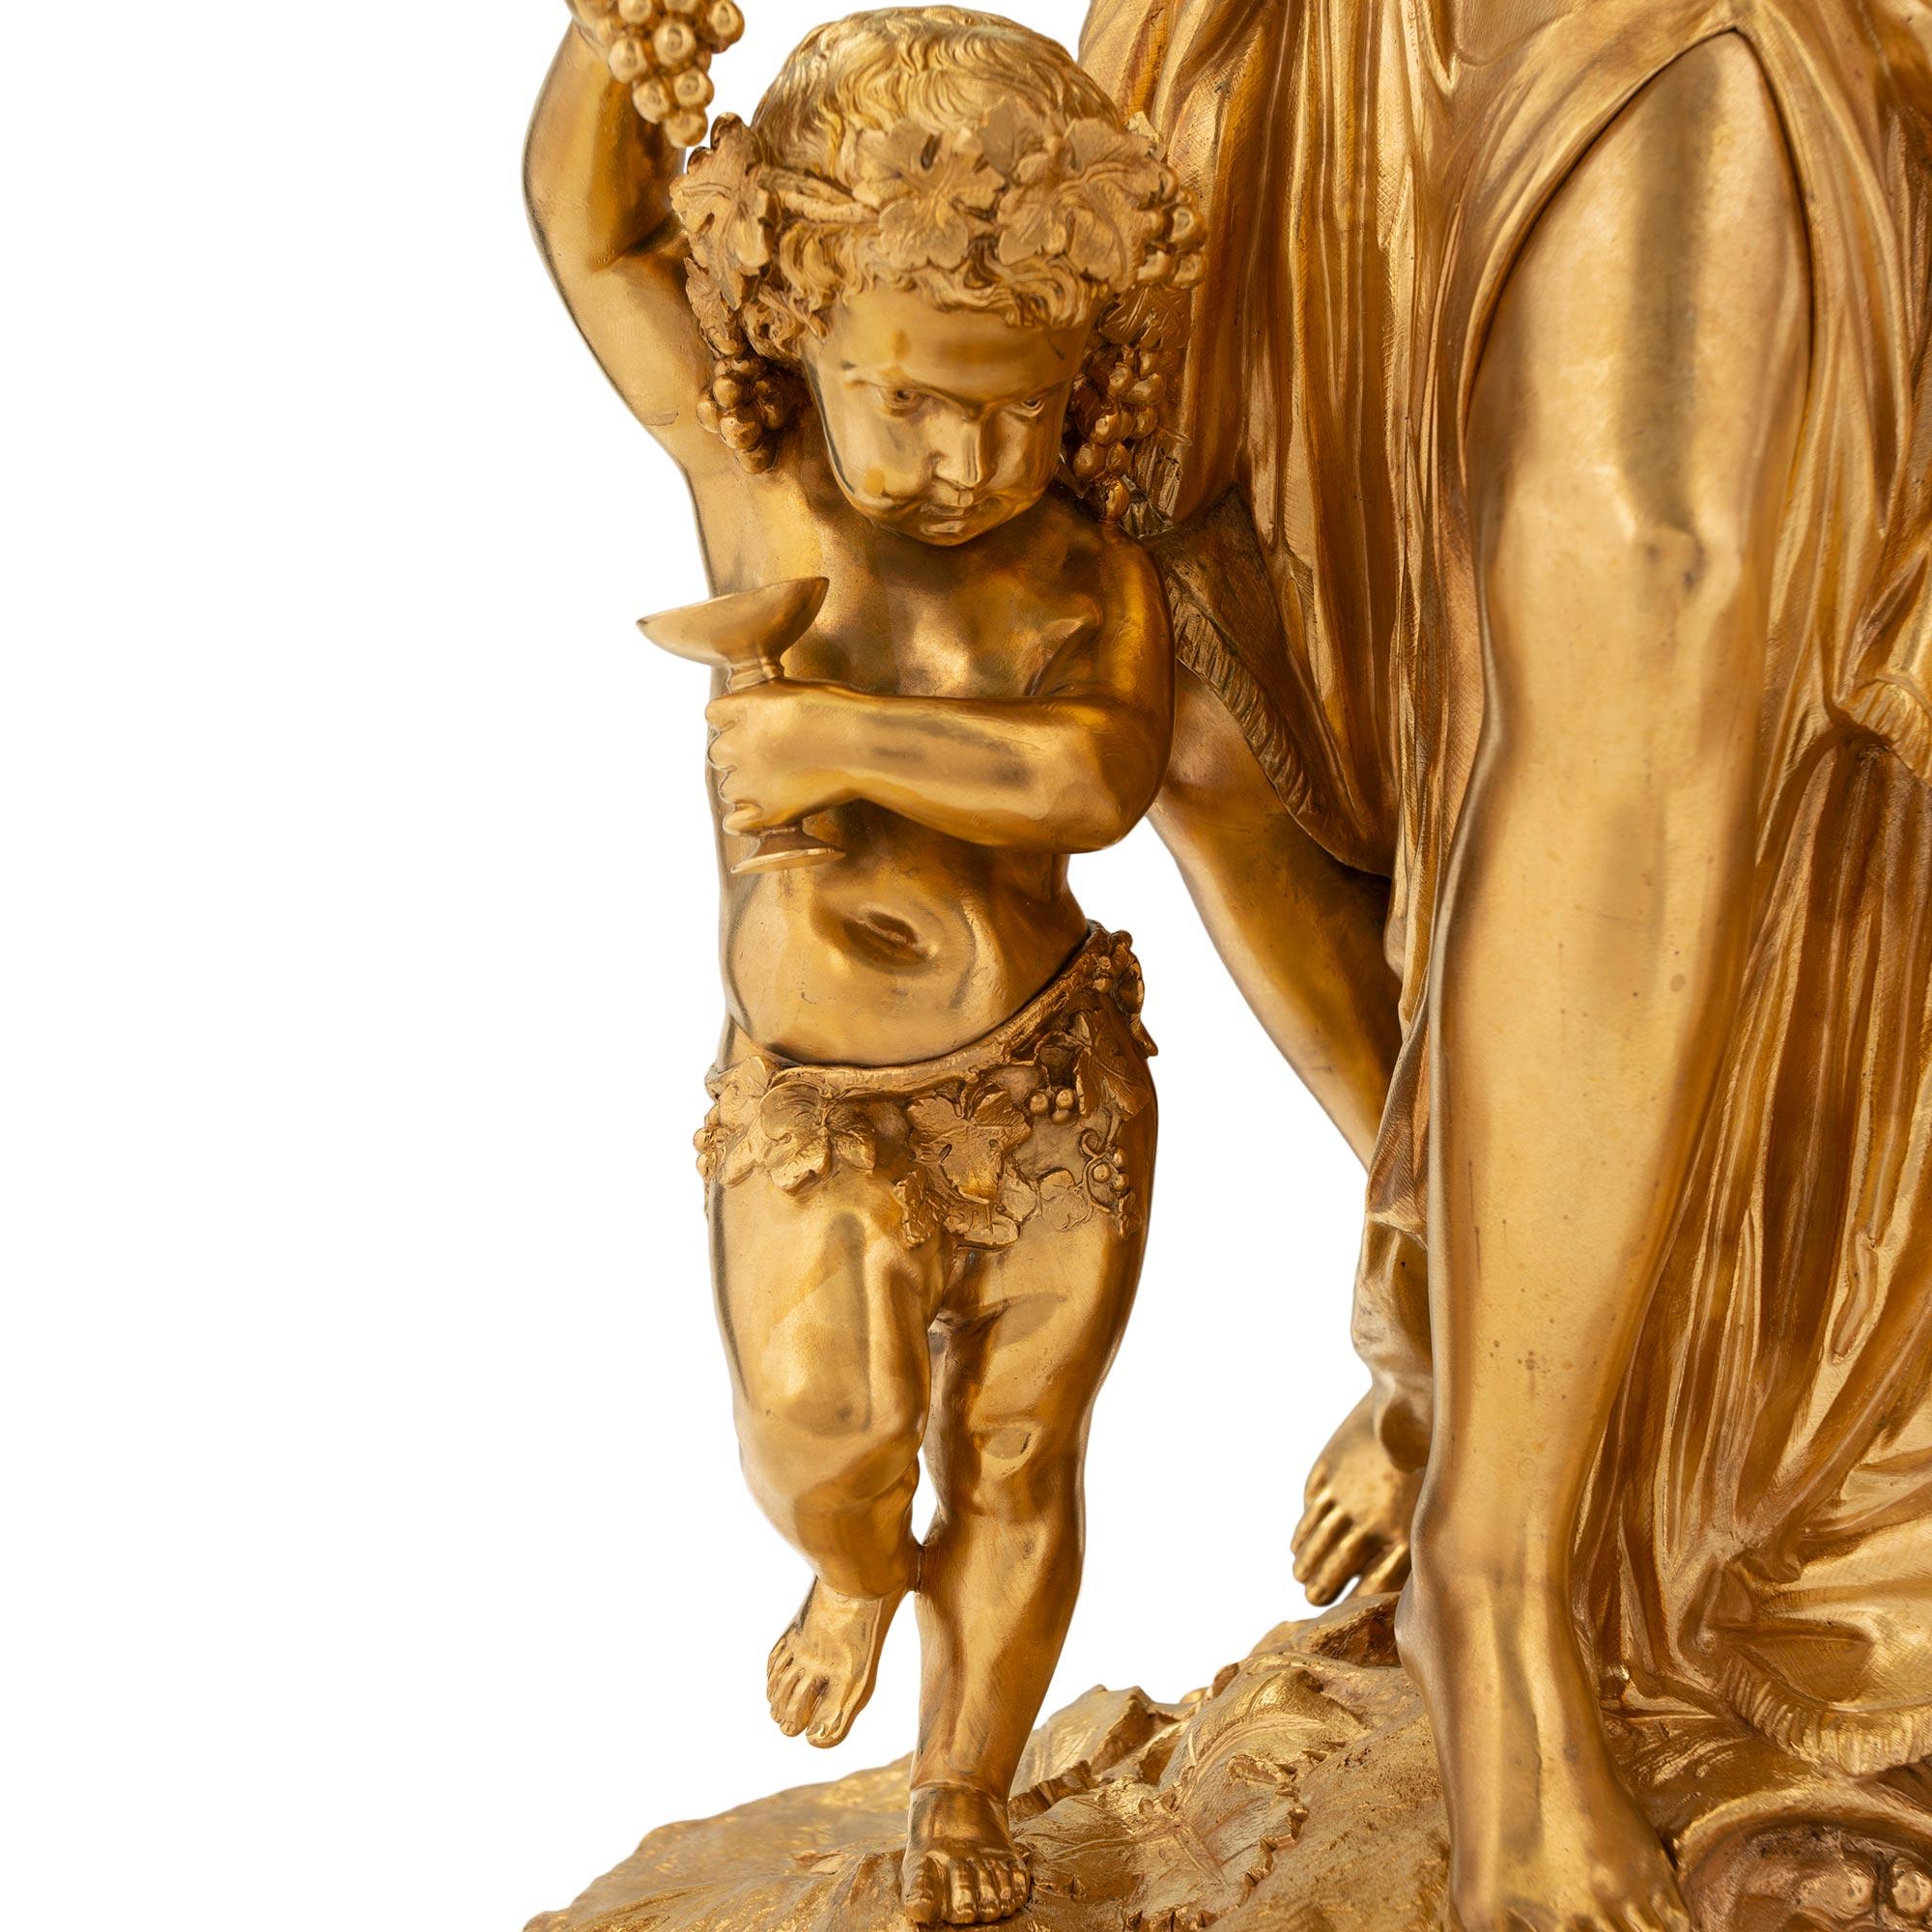 French Mid-19th Century Louis XVI Style Ormolu & Bronze Statue, Signed Delesalle For Sale 4